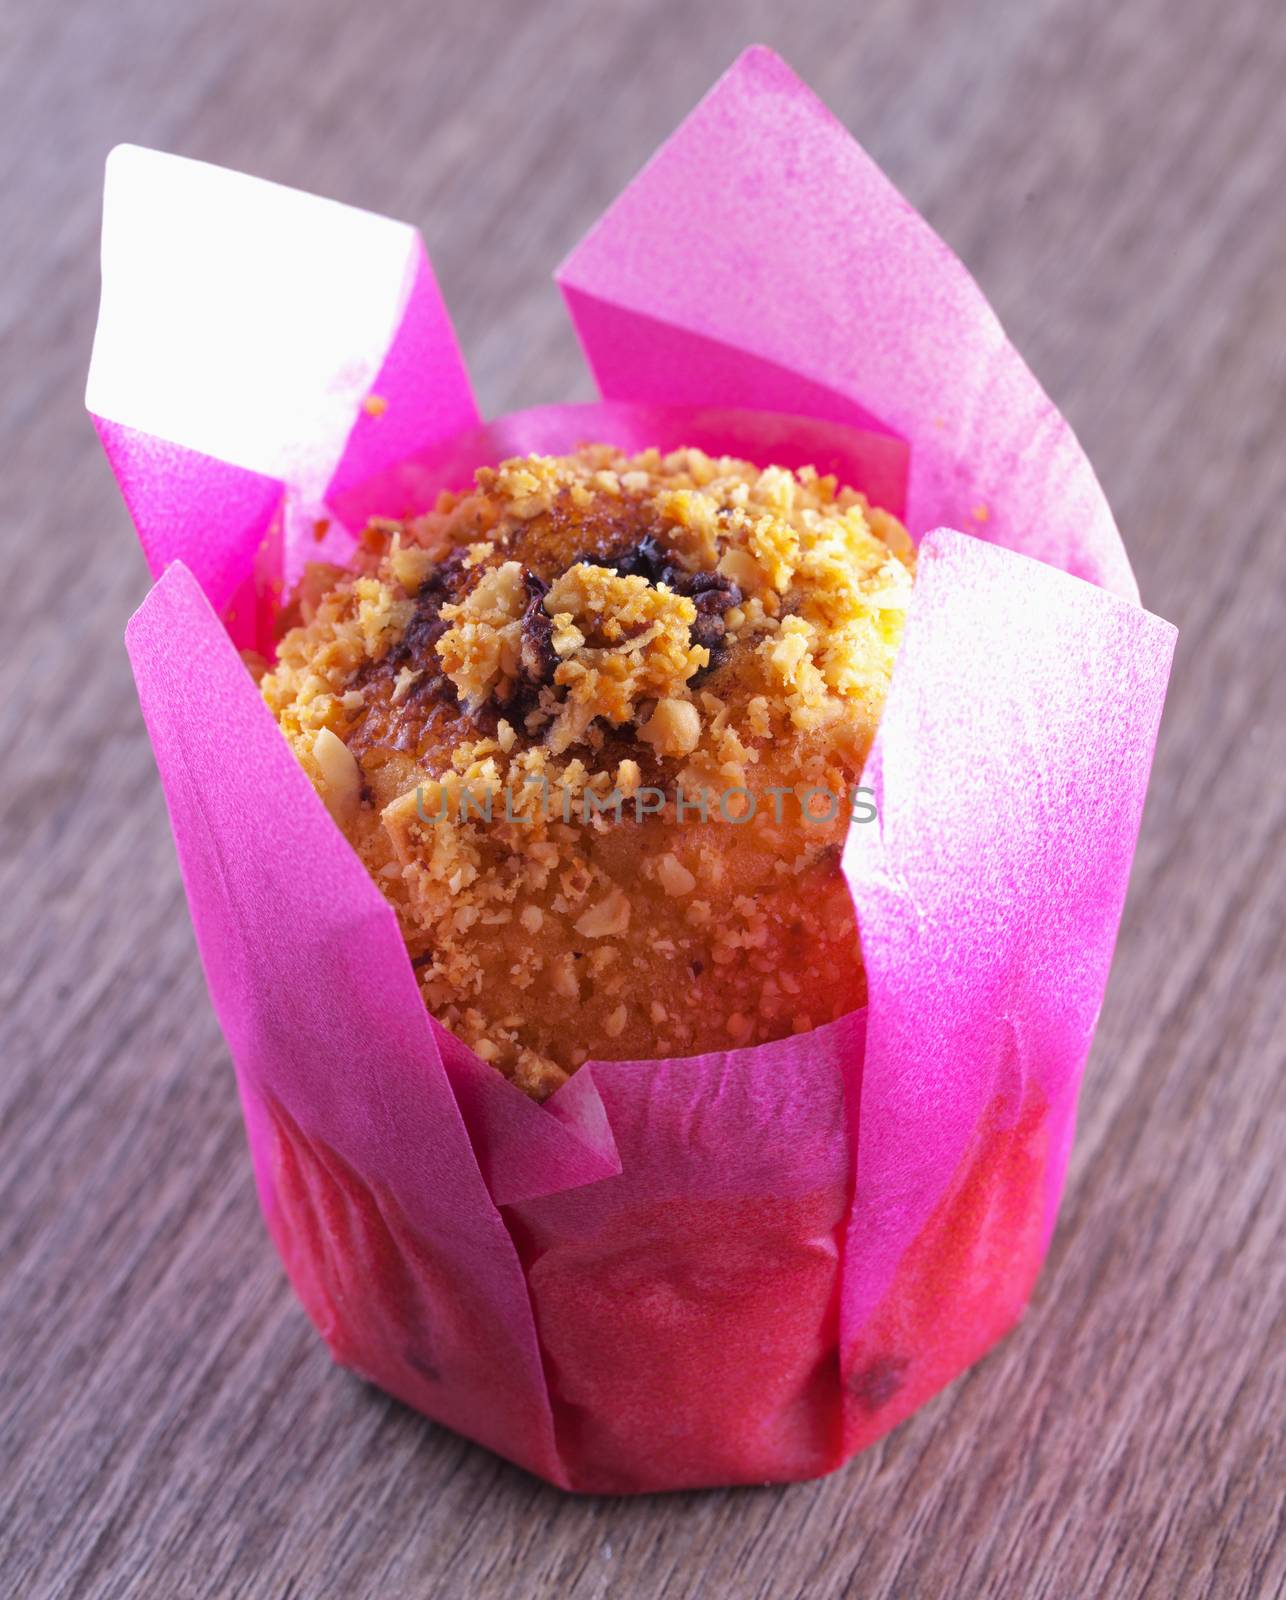 Chocolate muffin inside white and pink paper, over wooden table